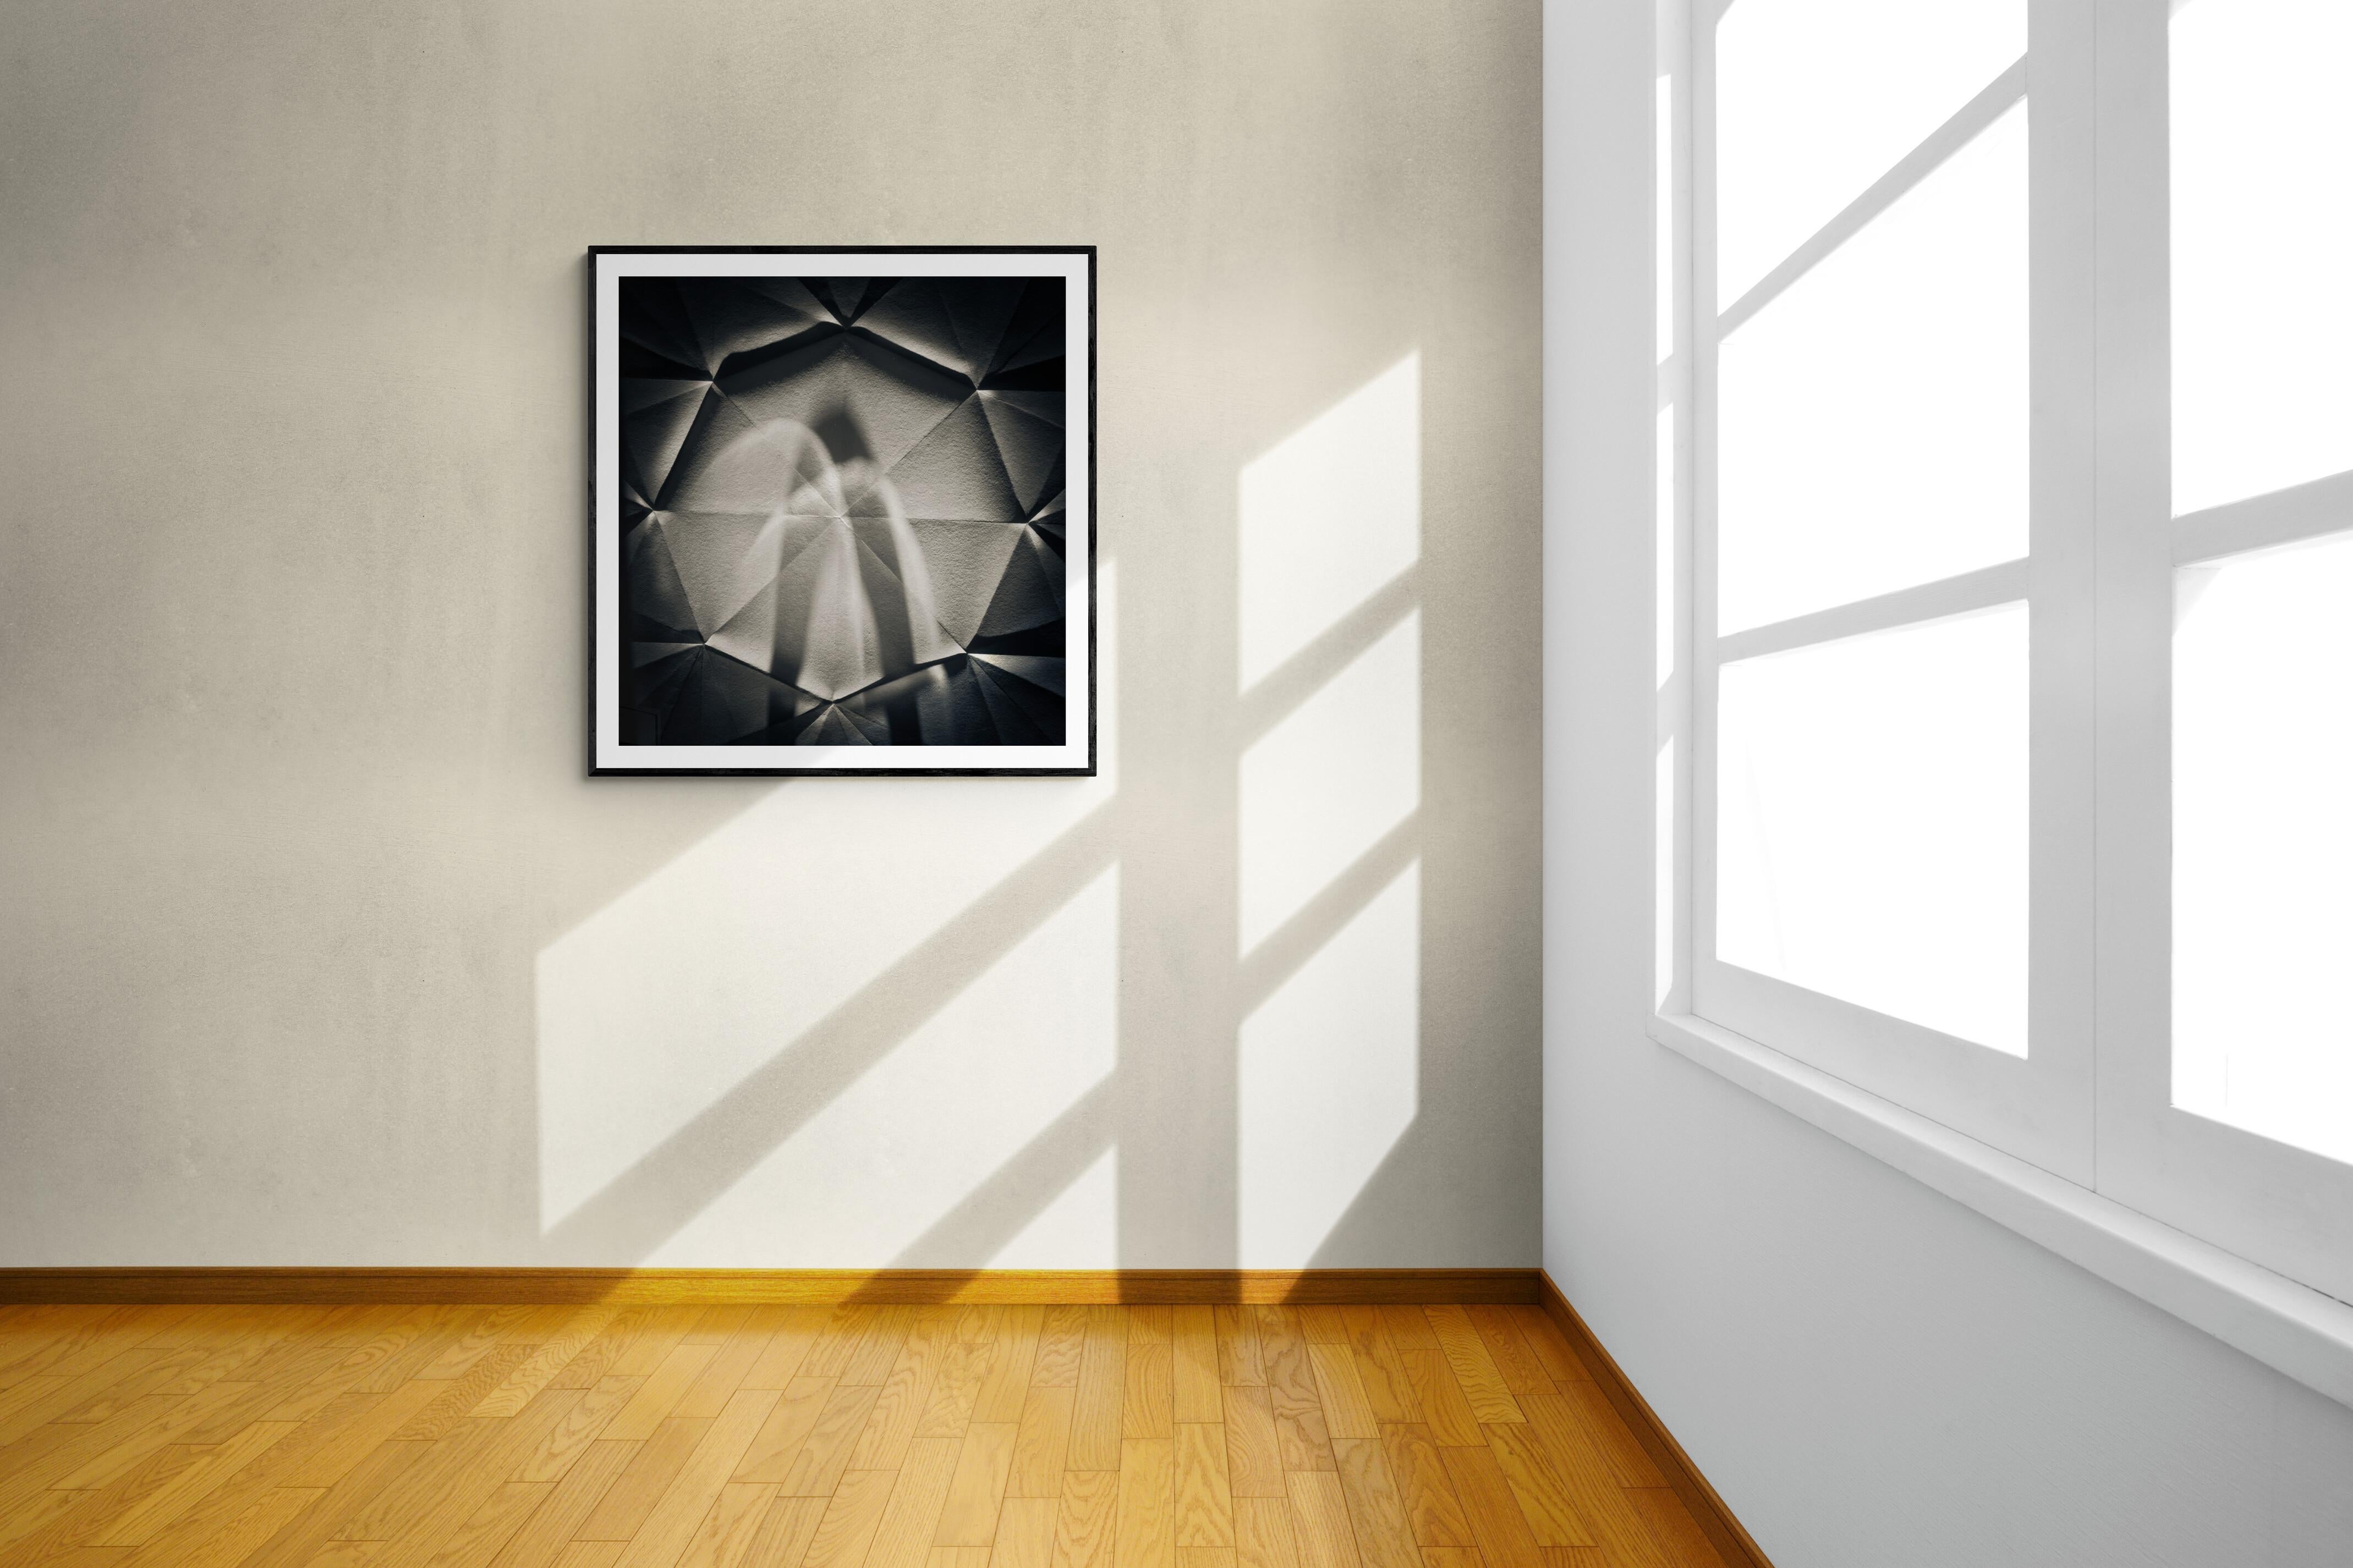 Limited Edition 1 / 10 20 x 24 Black and White Photograph - Origami Abstract #73 For Sale 3